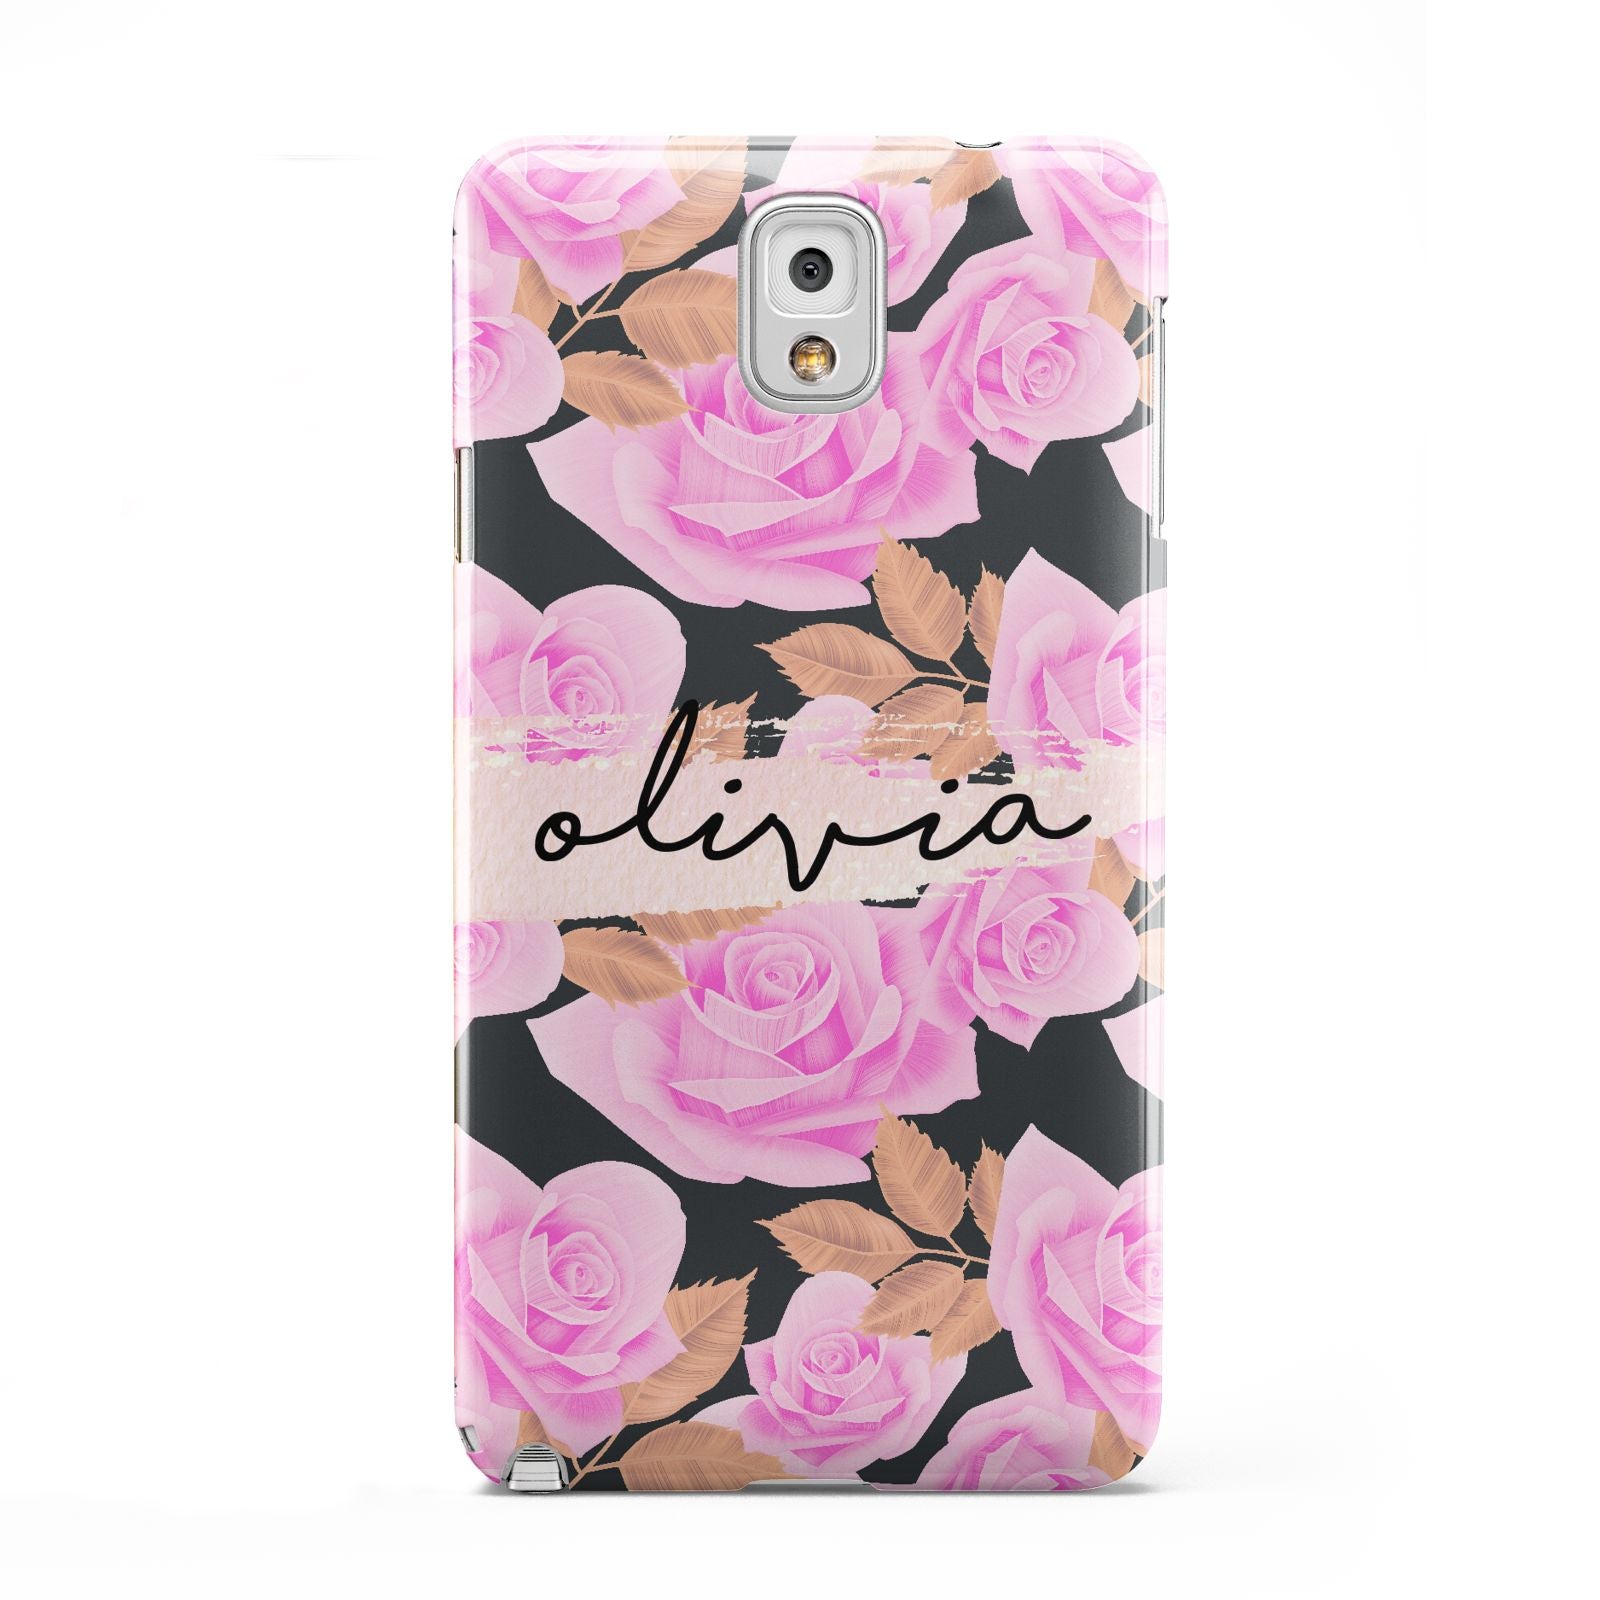 Personalised Floral Pink Roses Samsung Galaxy Note 3 Case